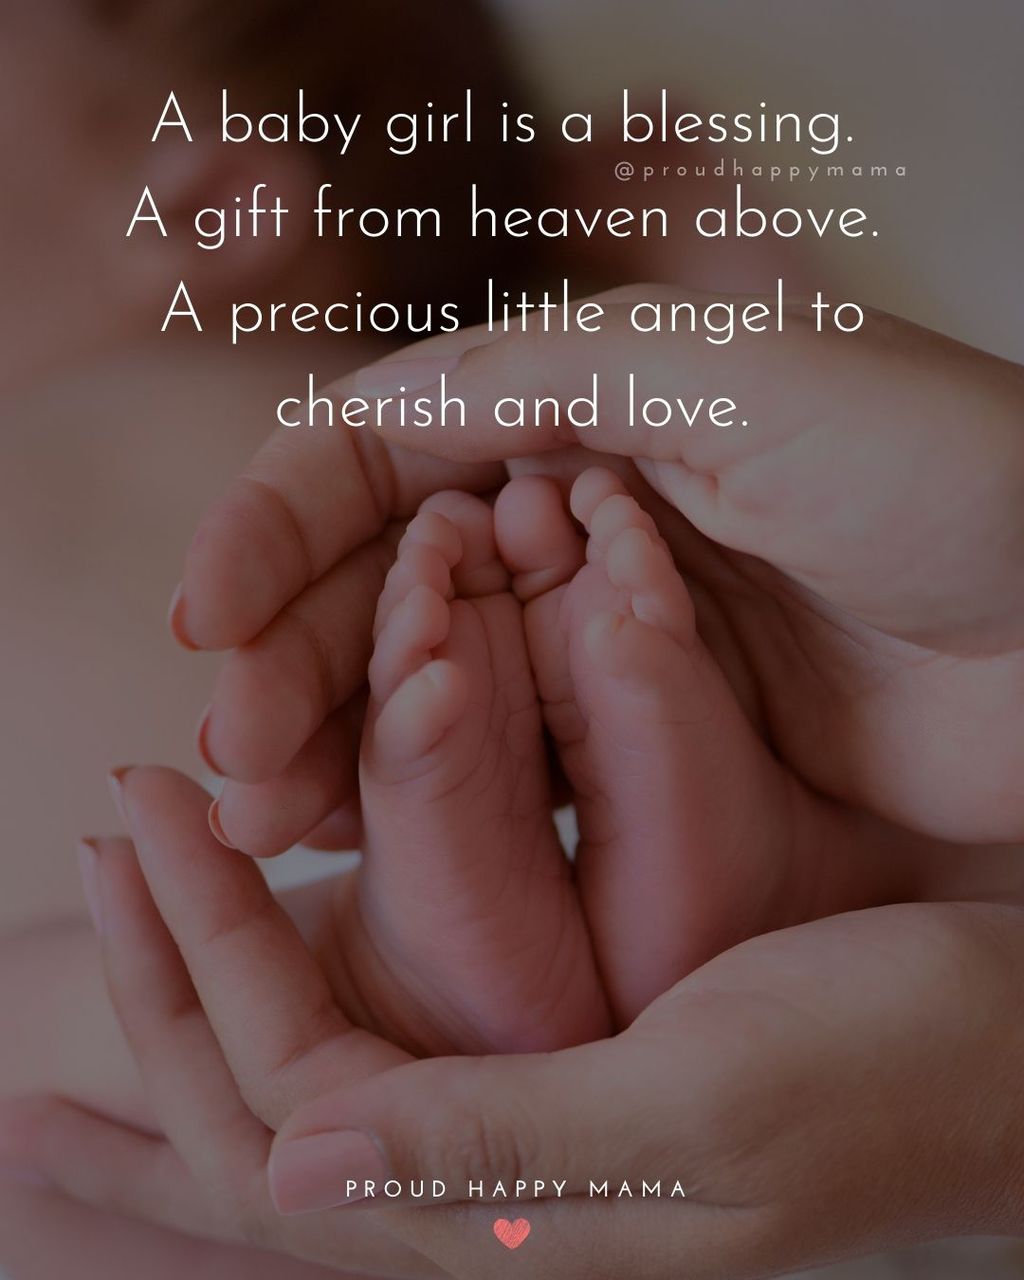 Baby Girl Quotes - A baby girl is a blessing. A gift from heaven above. A precious little angel to cherish and love.